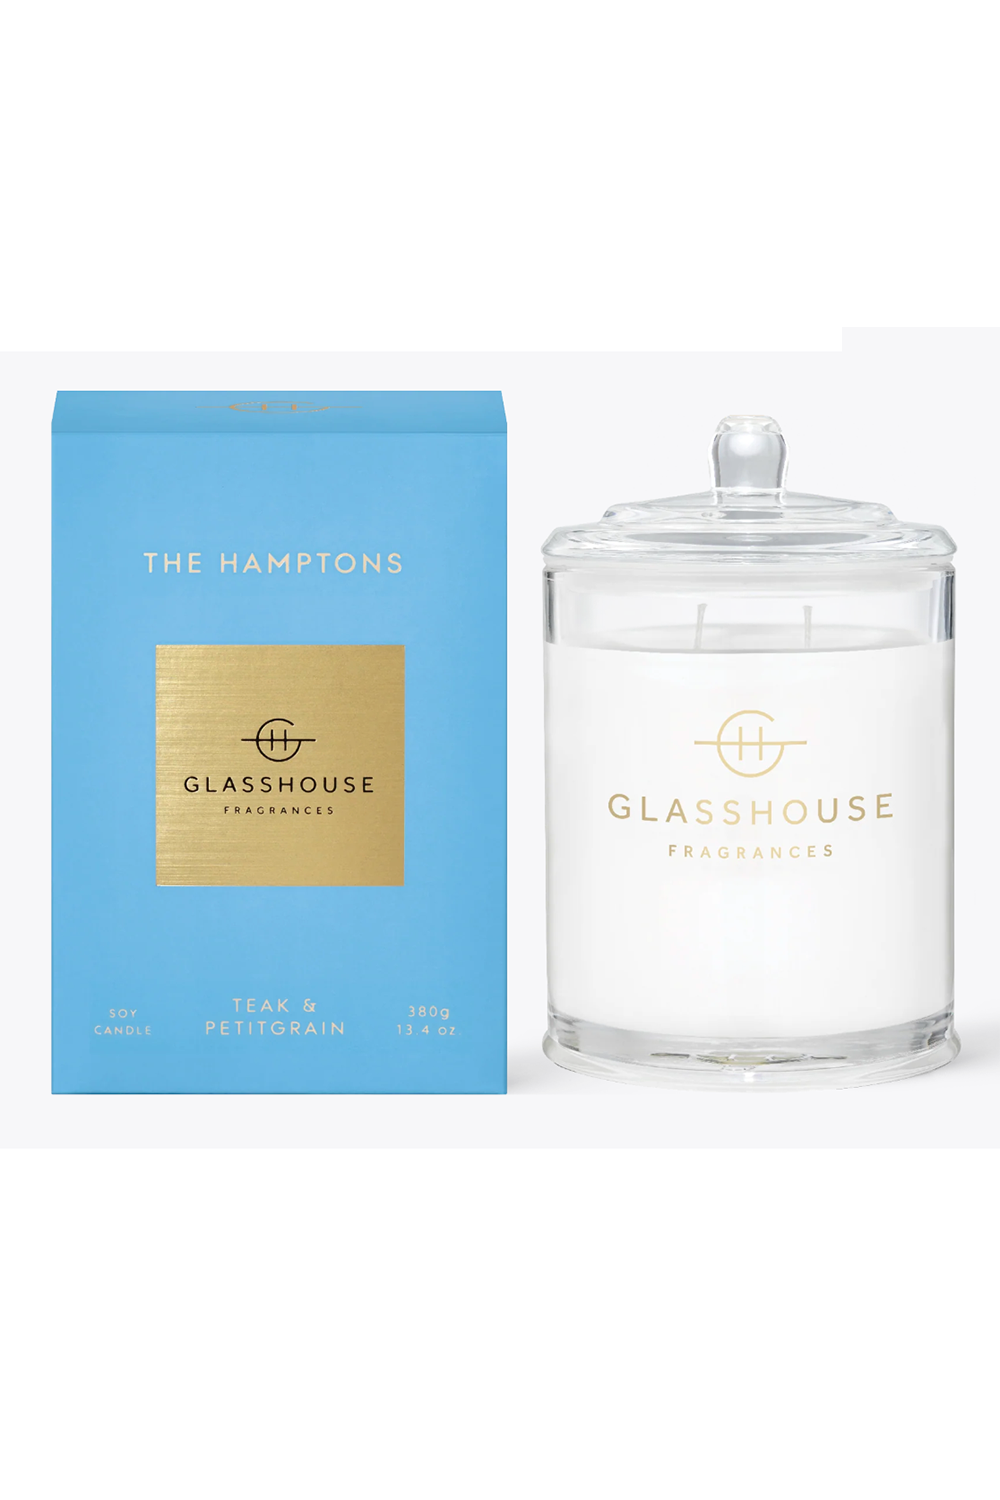 Glasshouse Fragrance Candle - The Hamptons